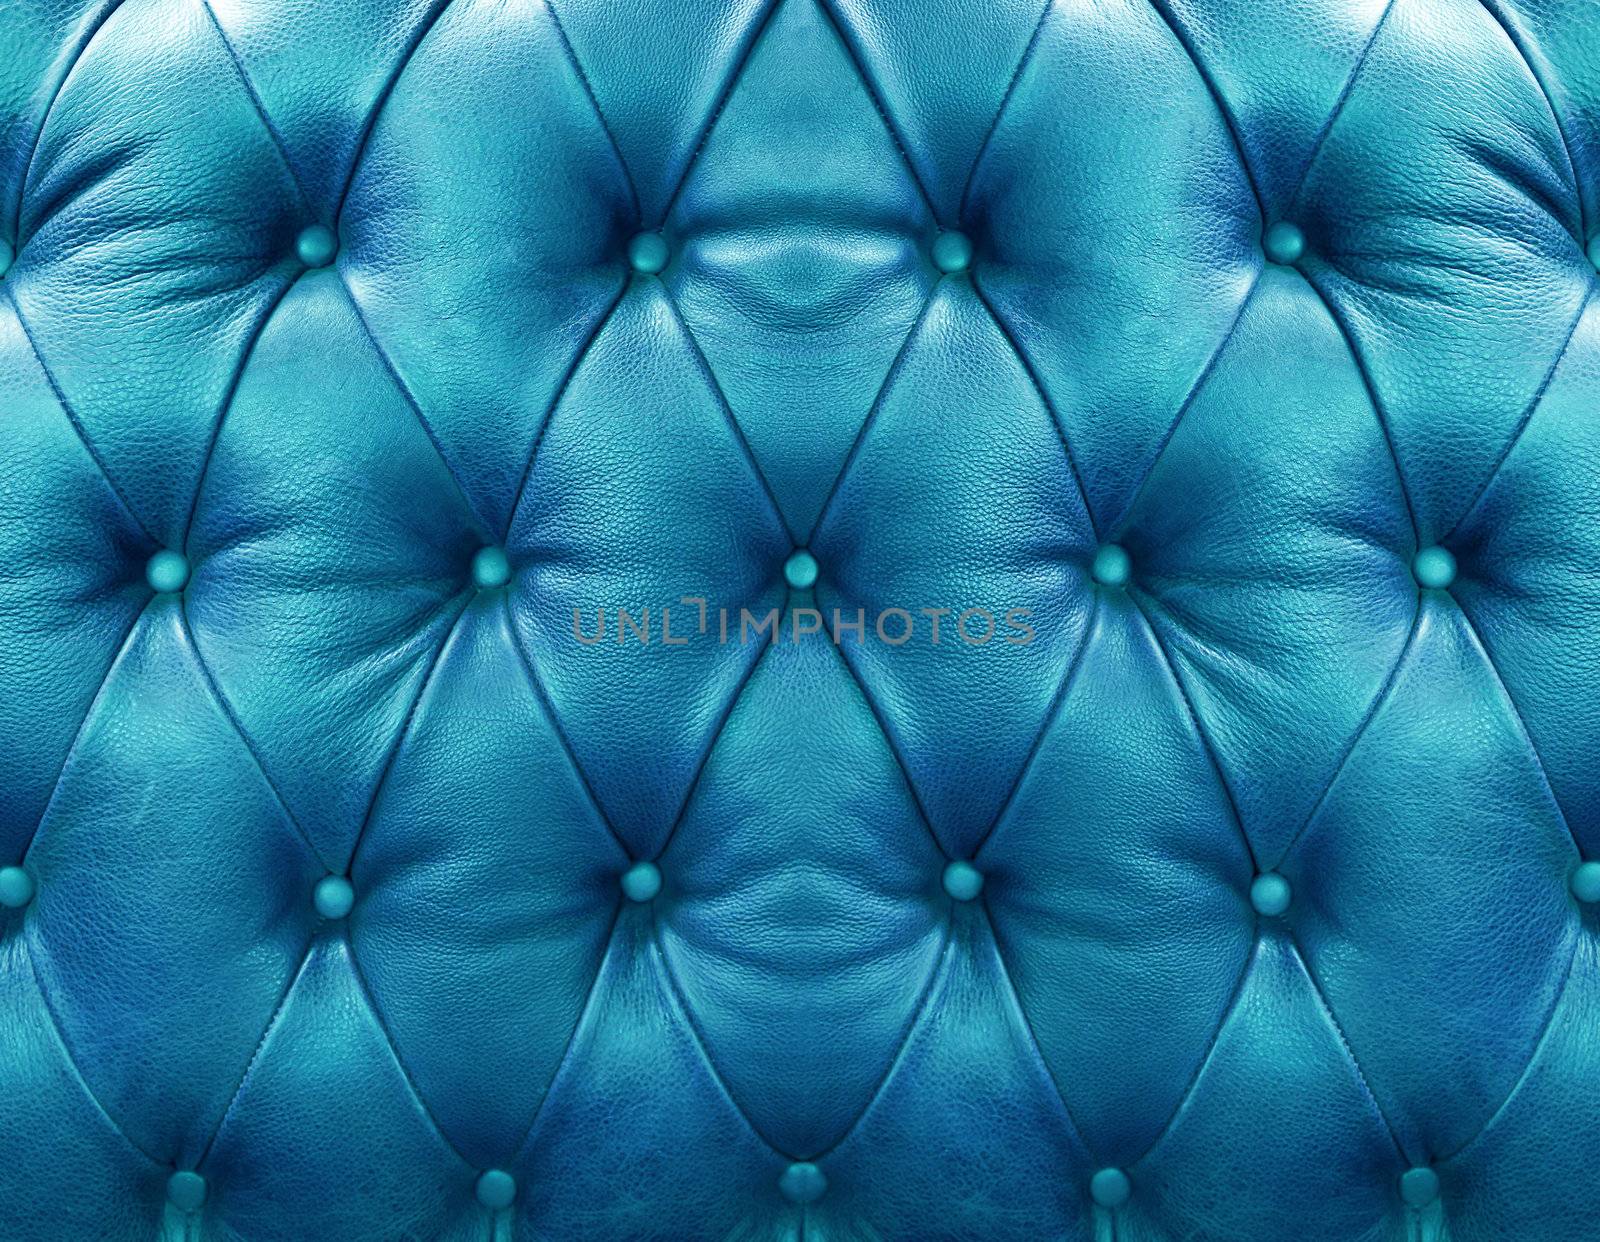 Blue upholstery leather pattern background